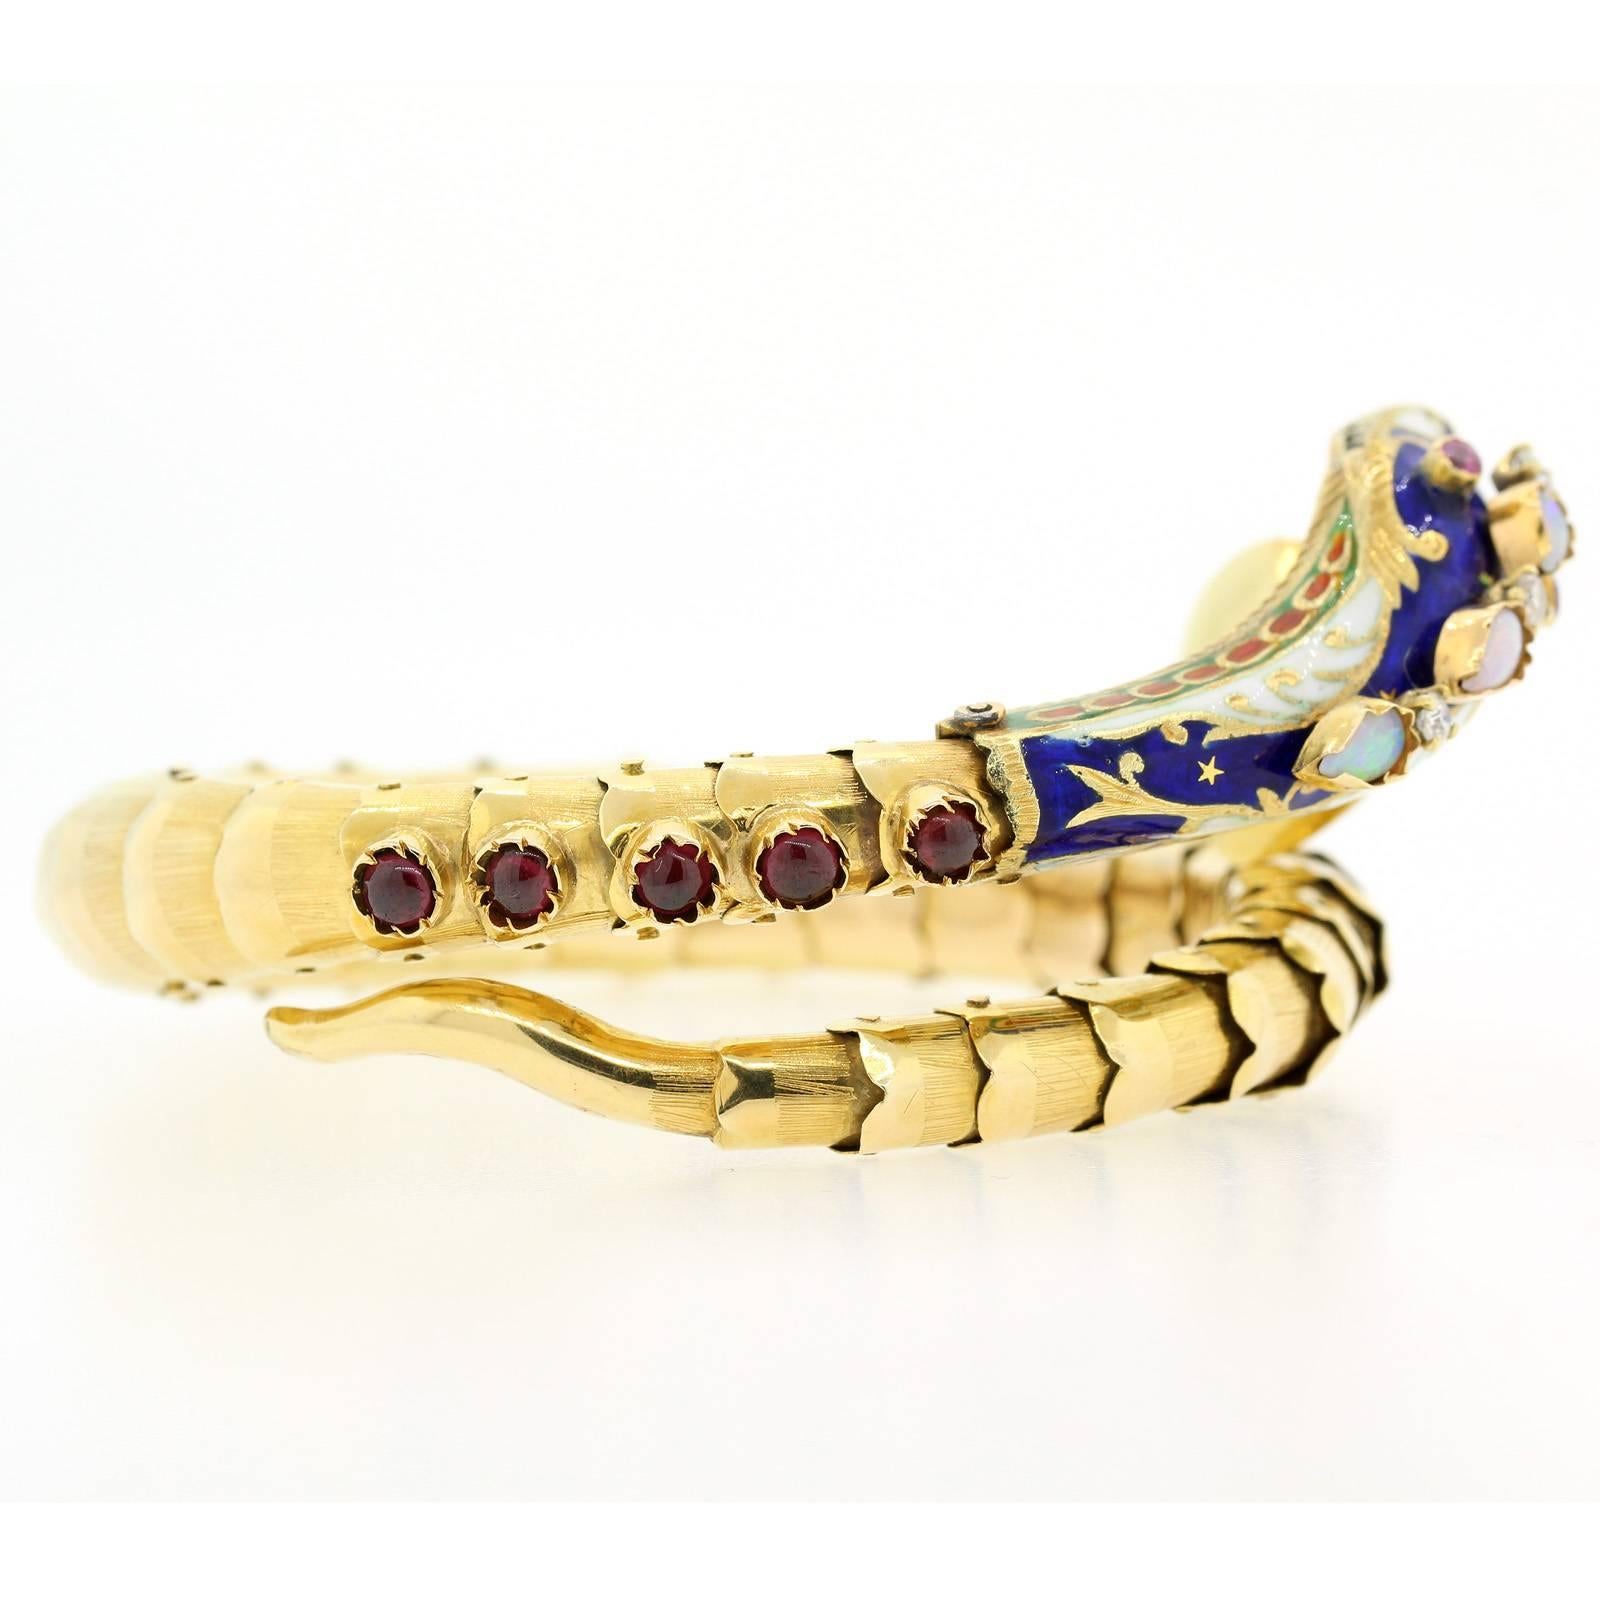 A splendid 1960s coiled snake blue enamel bracelet.  The 18KT gold snake has f flexible scales and a body accented with blue and white enamel, red Ruby eyes, Opals,  cabochon cut Garnets, and three Old European Cut Diamonds.  A dangling offering